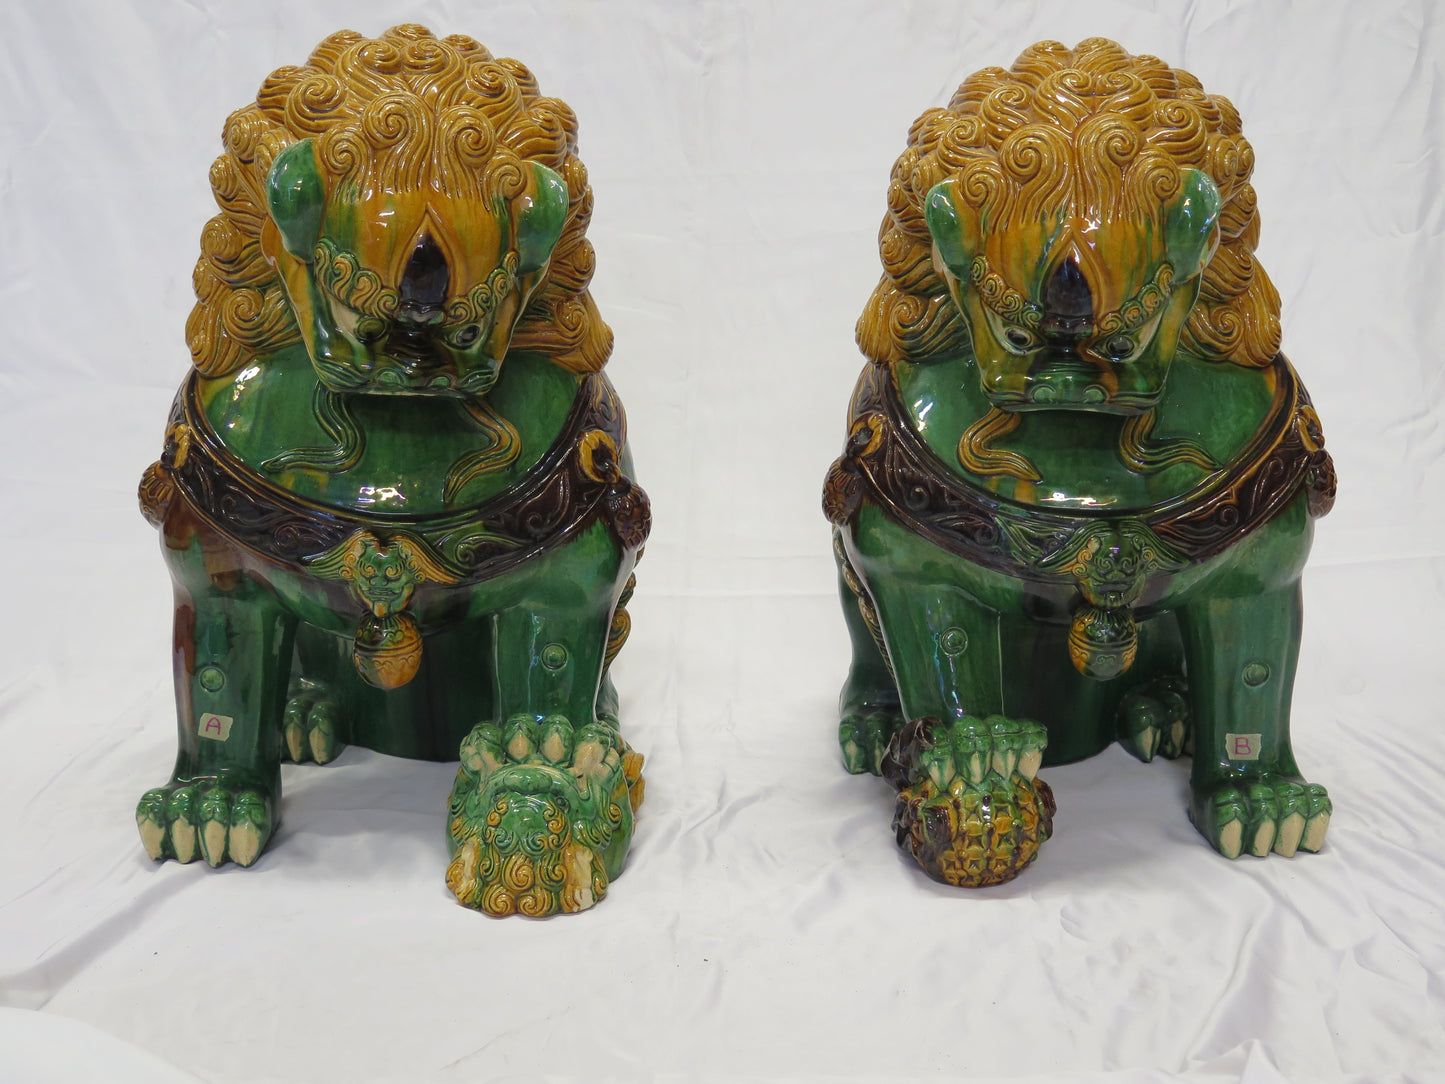 Two large ceramic foo dogs 88cm tall vintage Chinese ceramic hand painted Shishi China Chinese guard lions large glazed ceramic